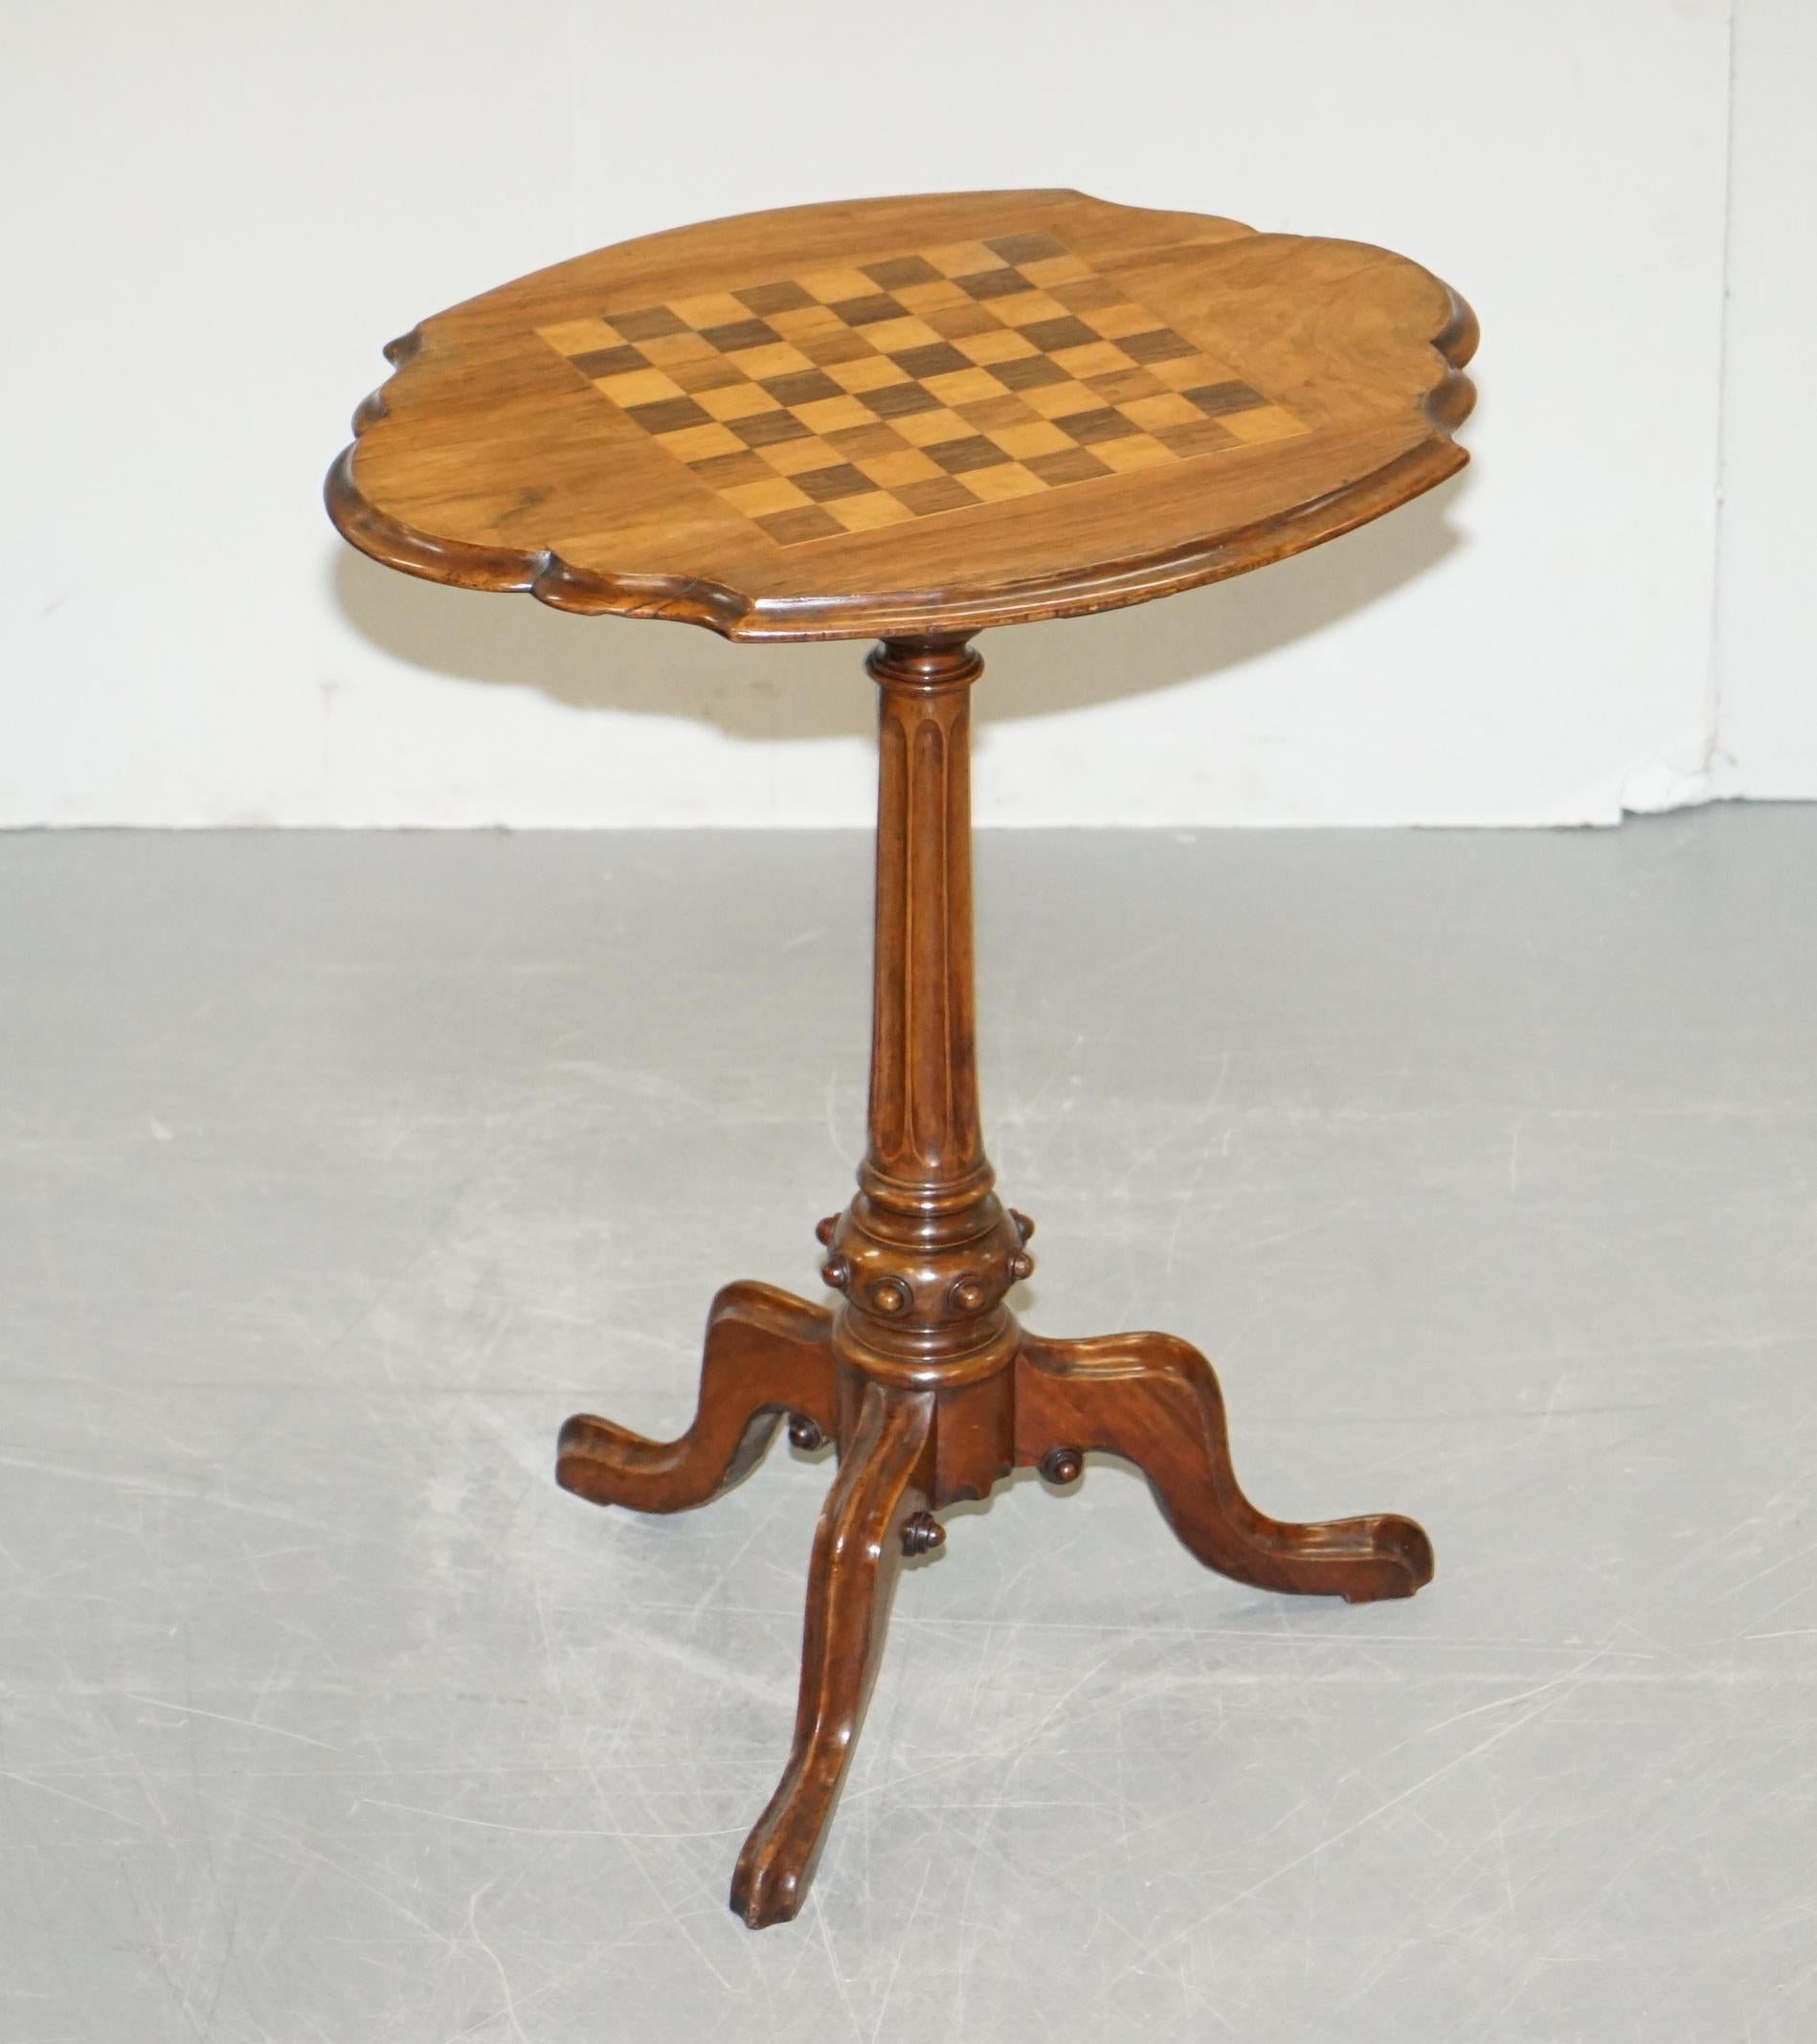 We are delighted to offer for sale this lovely small Victorian 1880 walnut & mahogany marquetry inlaid Chess games table

A very good looking well made and function piece of furniture, extremely decorative, the top has gorgeous Walnut & Mahogany